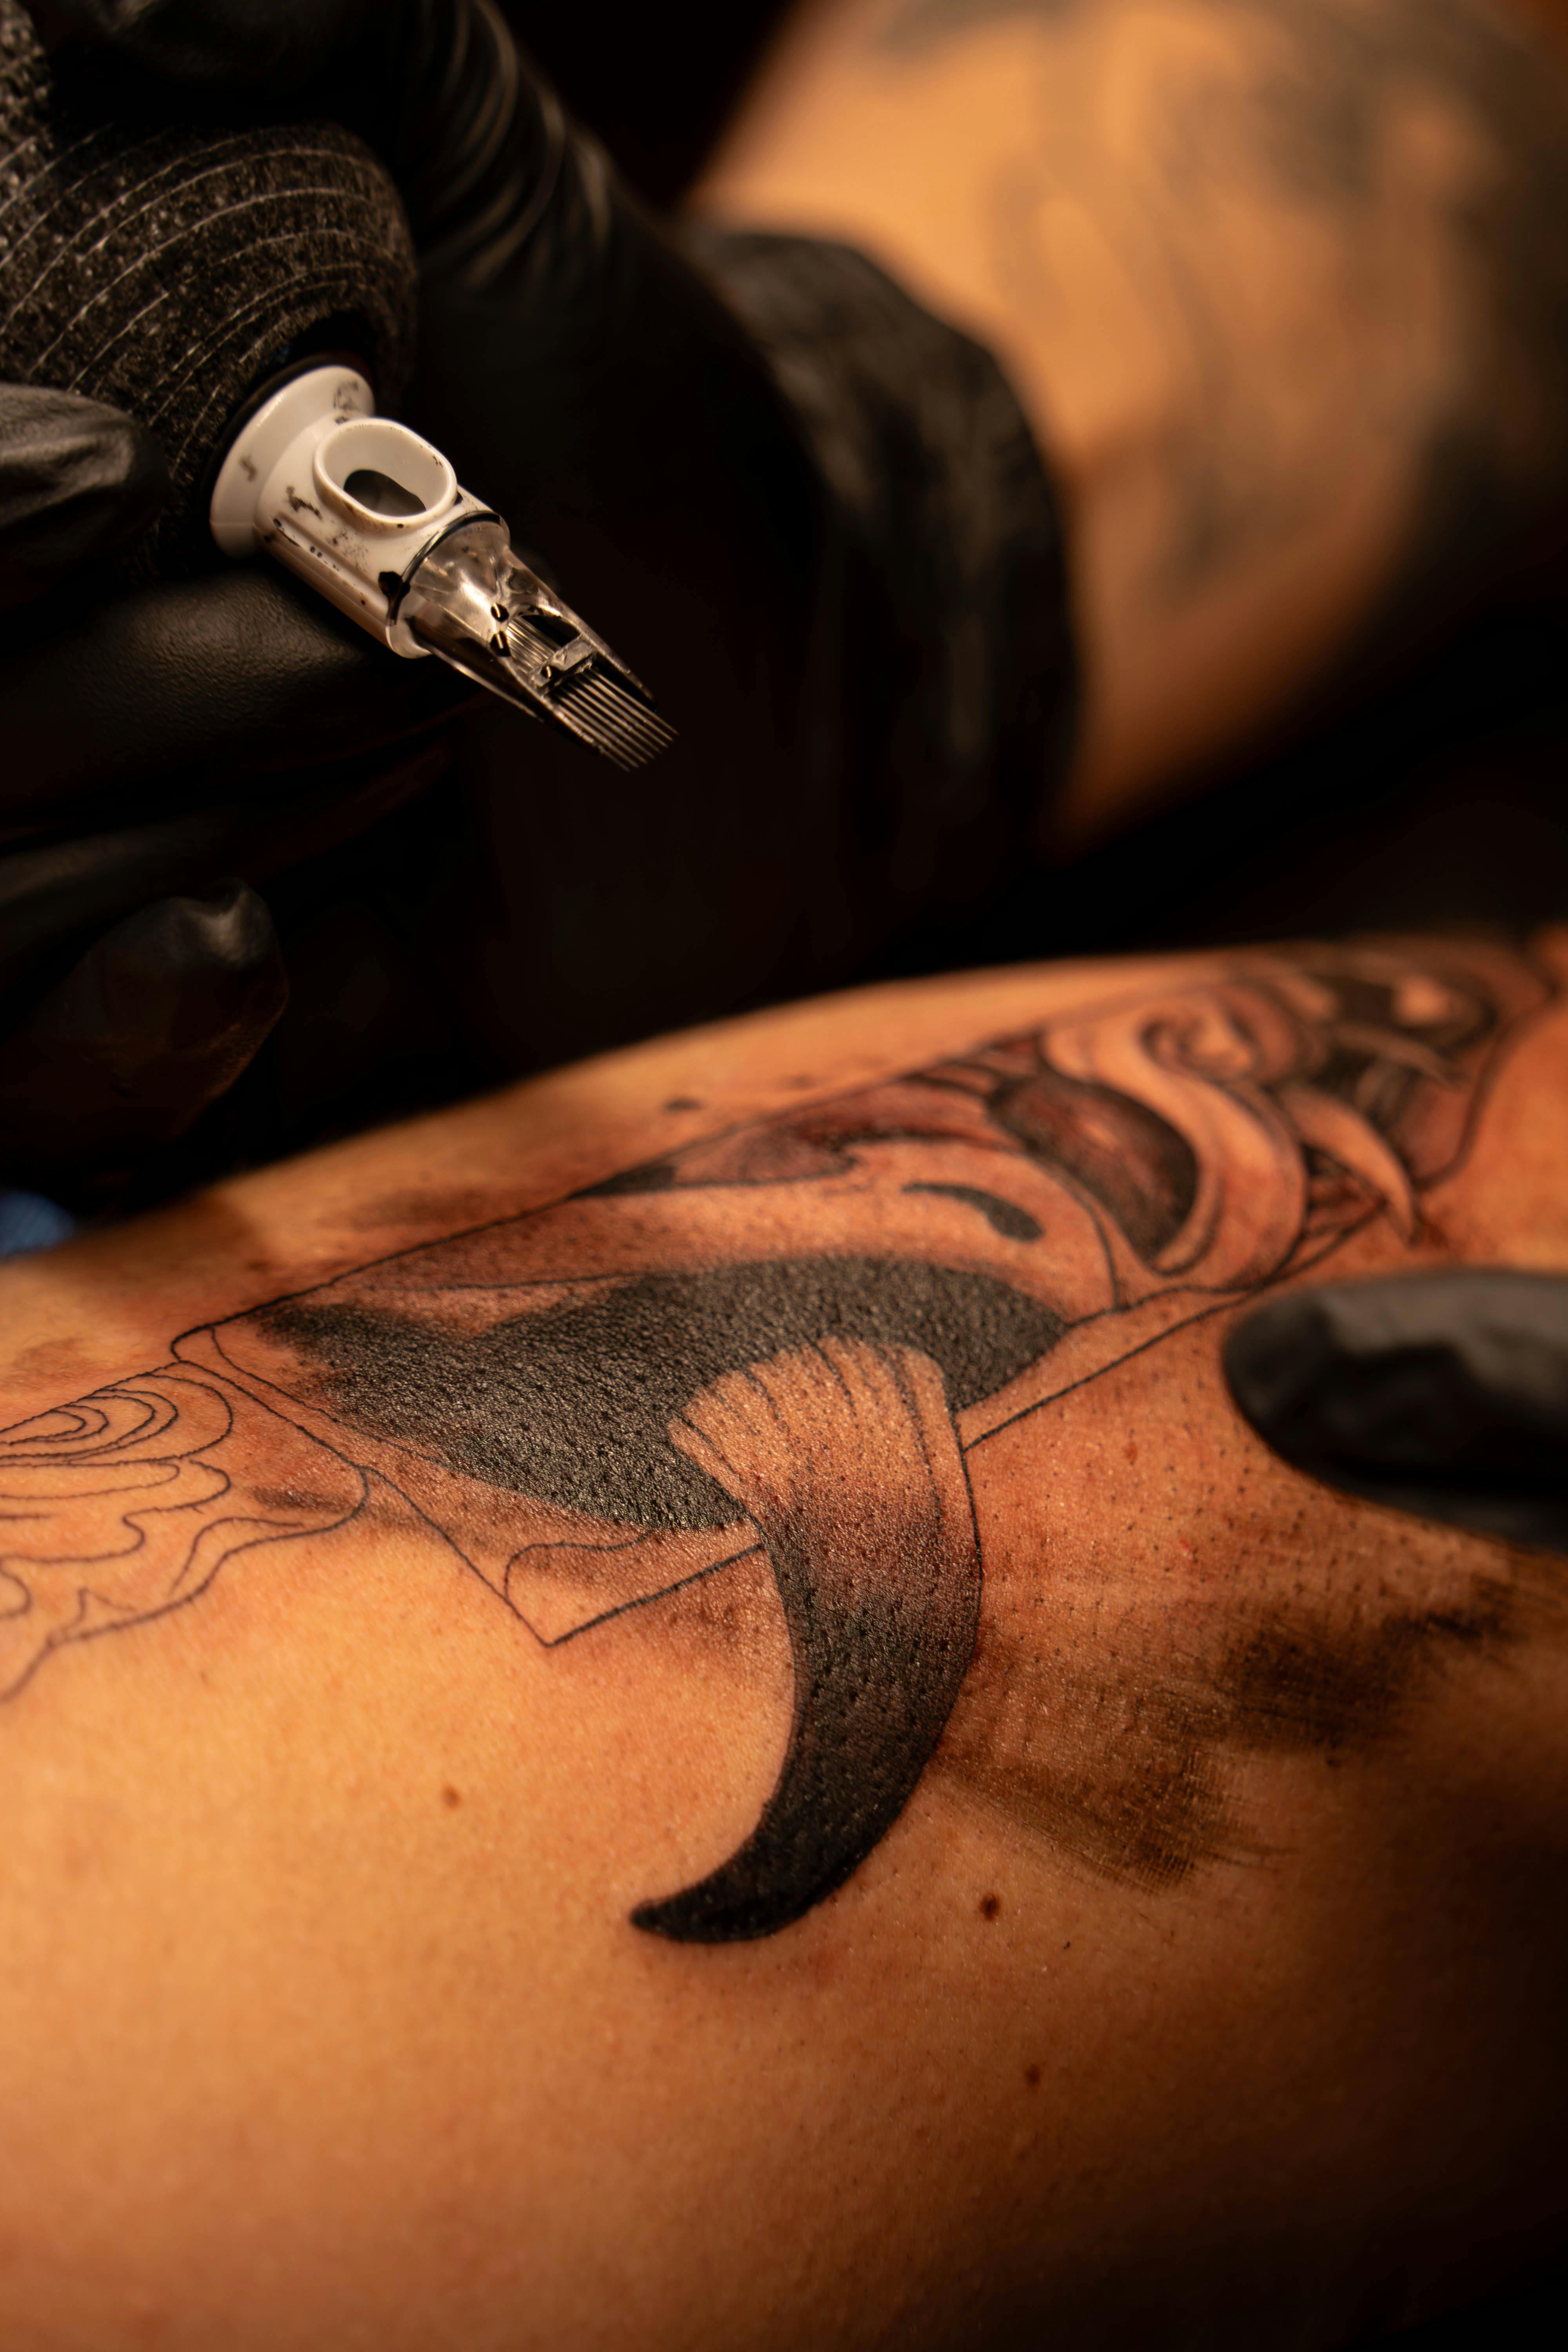 French tattoo artist finds a new vibe in Lafayette – The Current